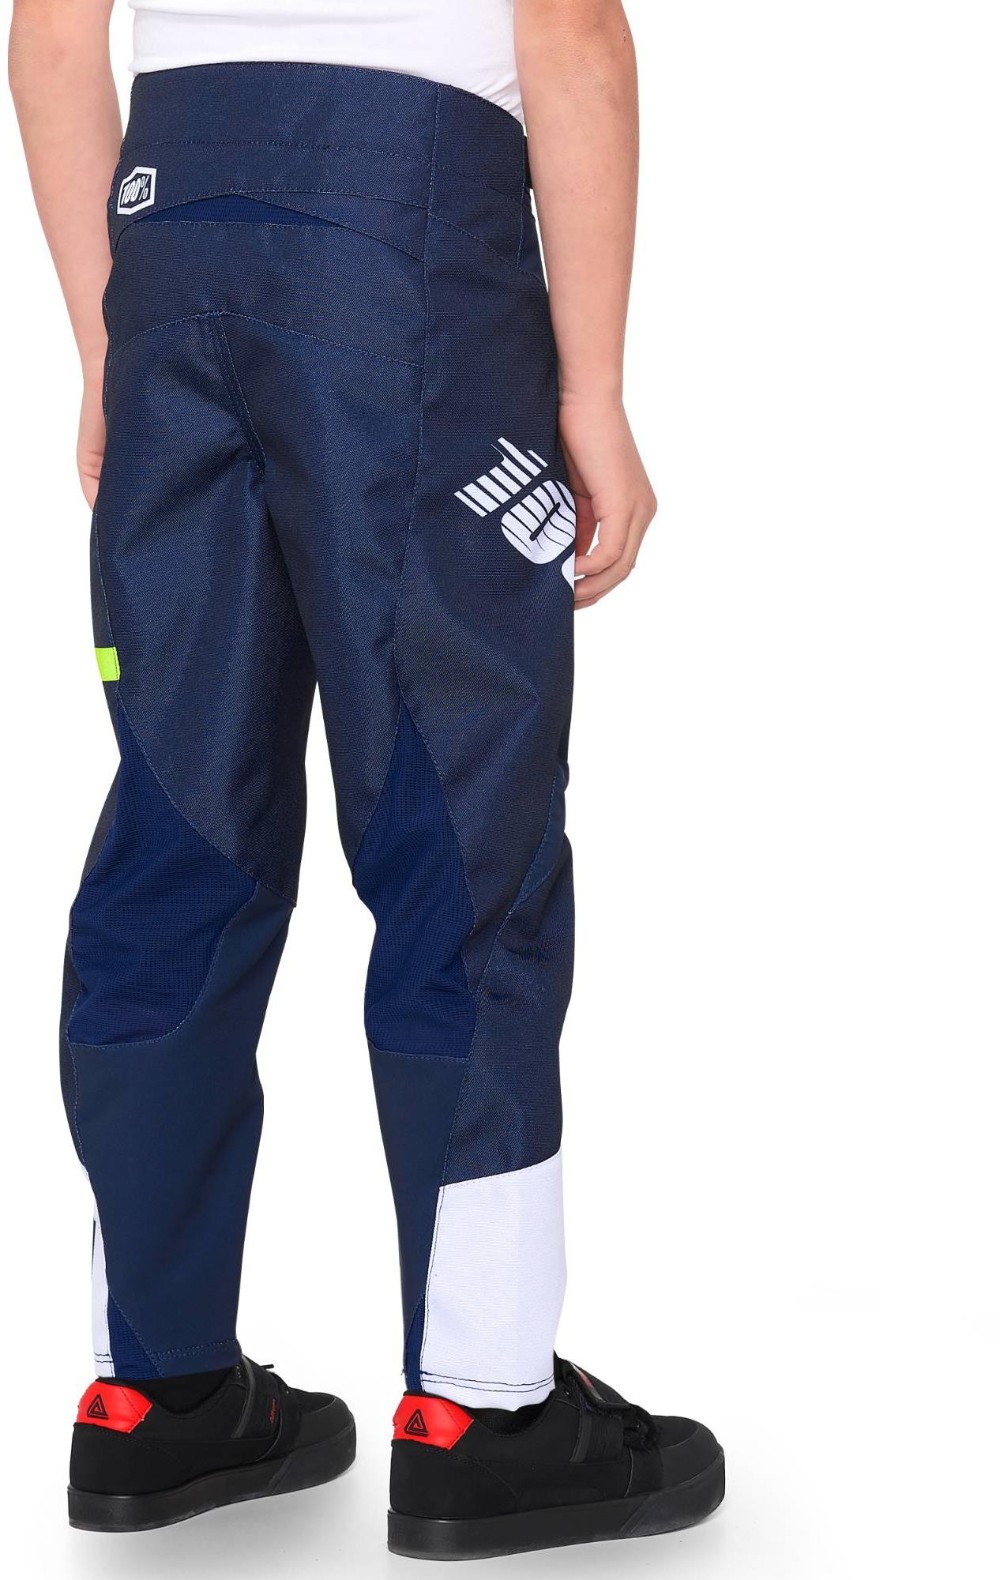 R-Core Youth Trousers image 1